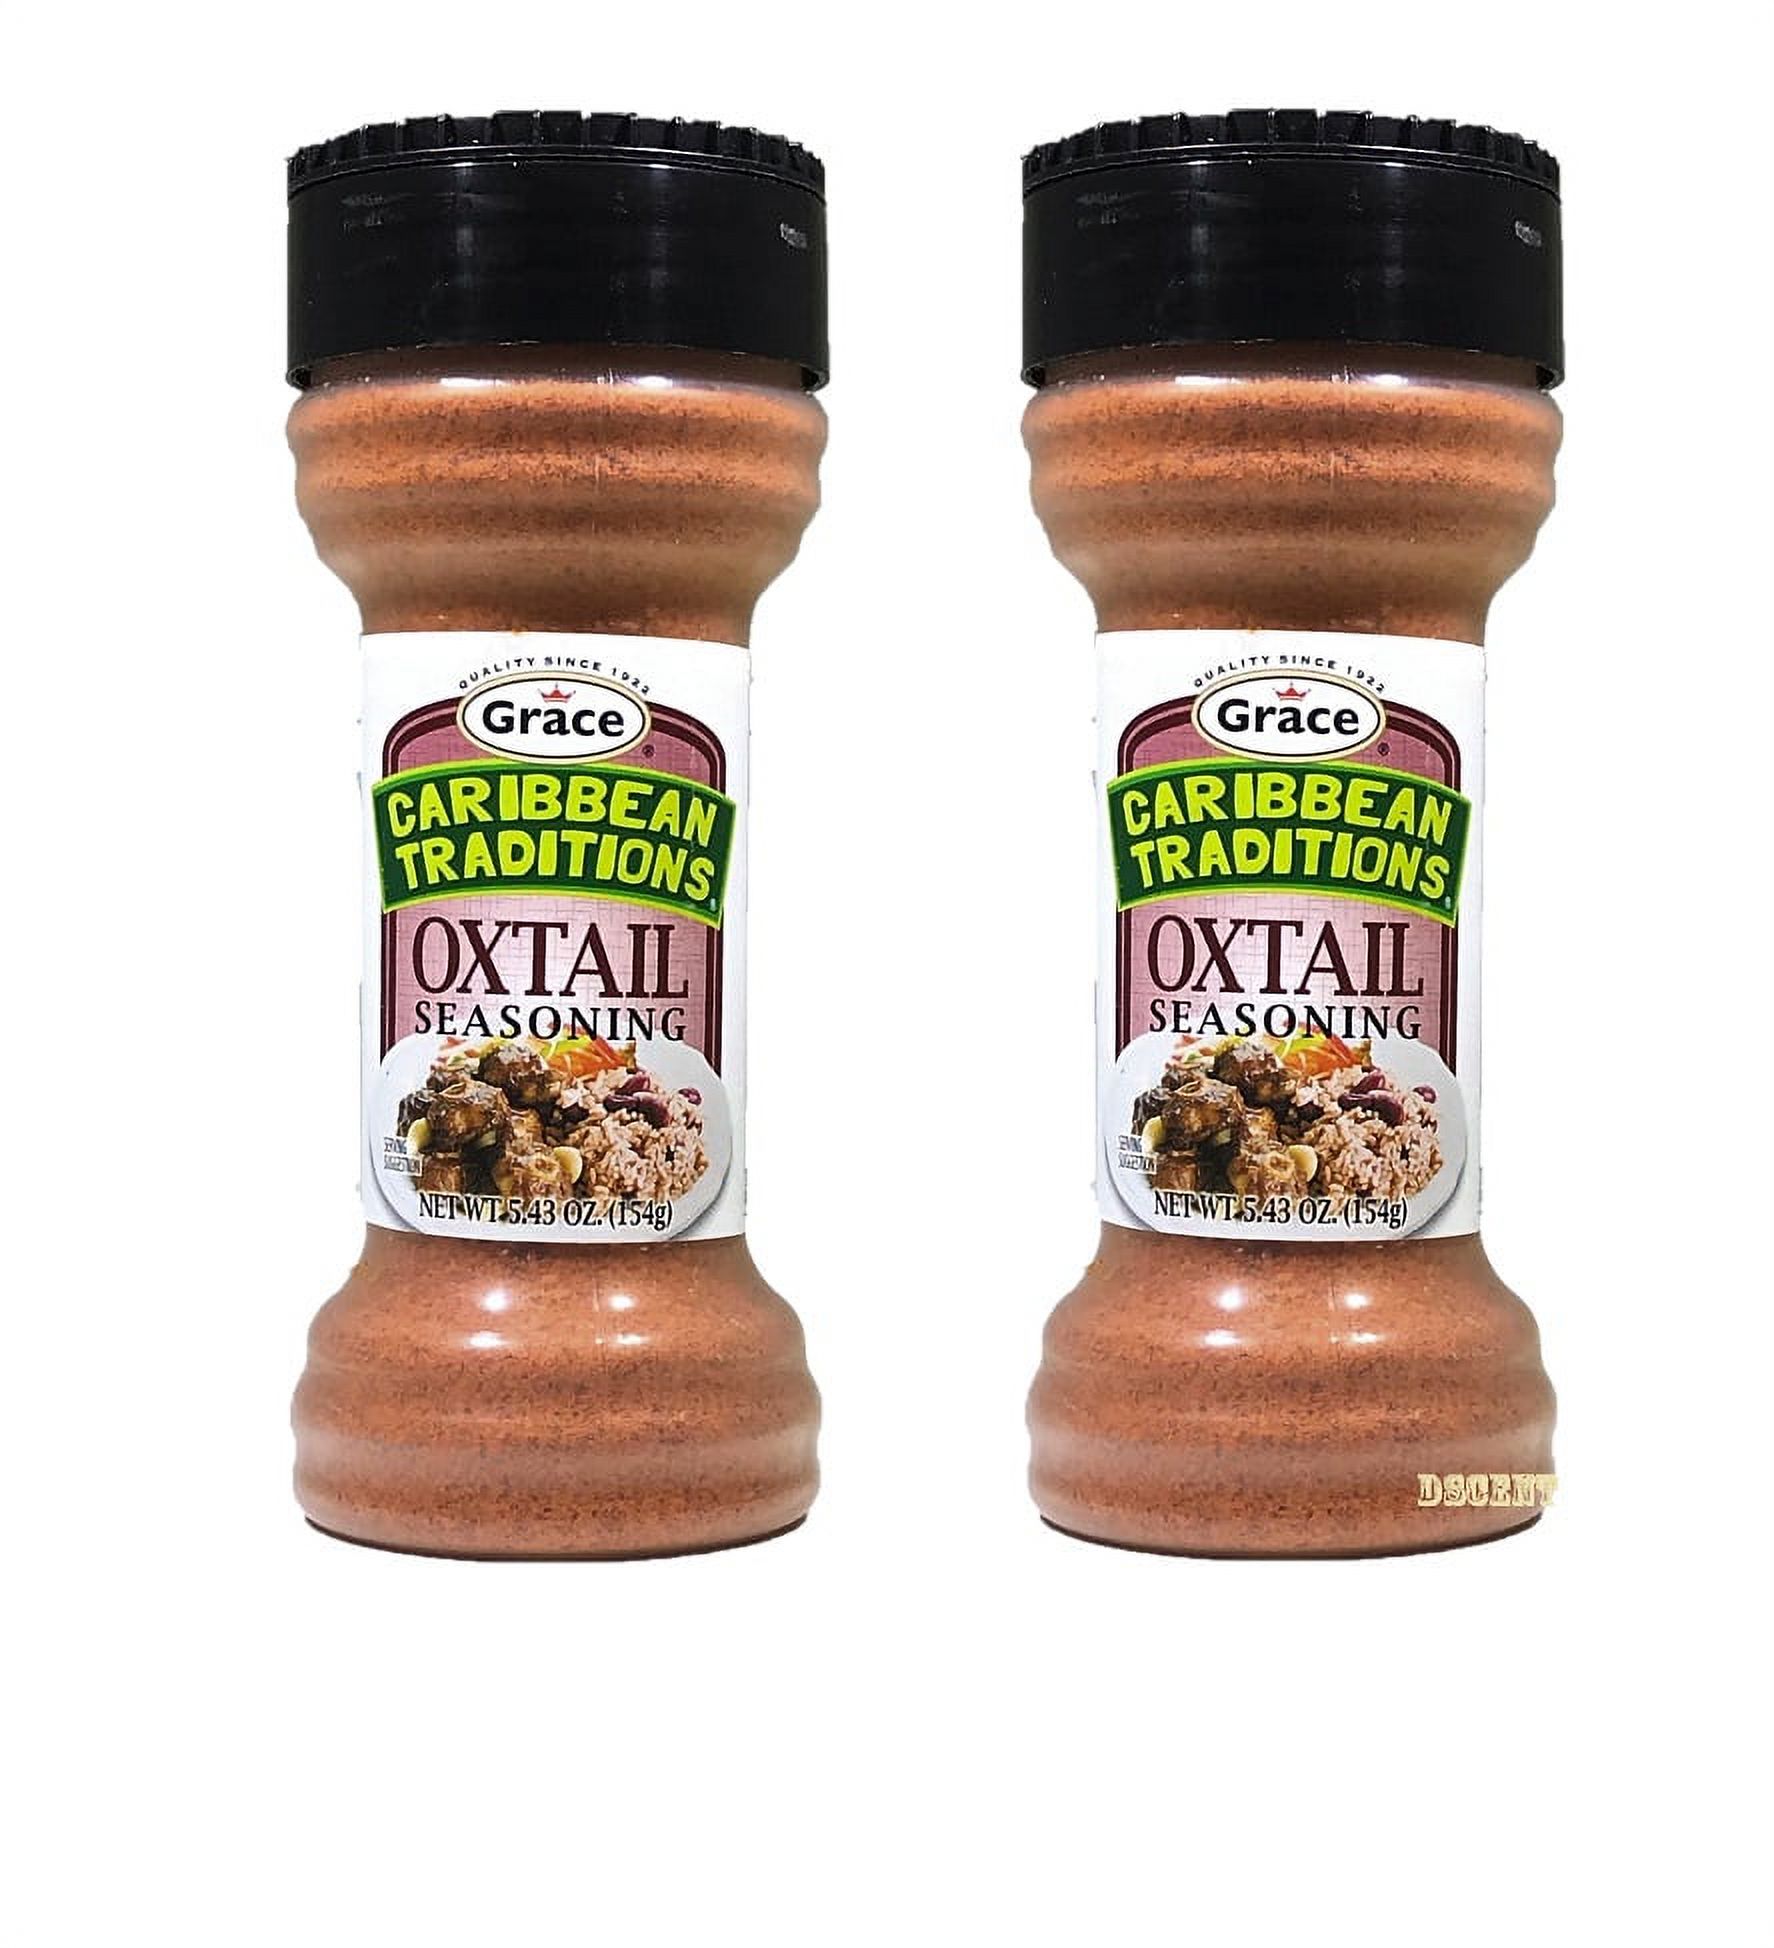 Grace Caribbean Traditions Oxtail Seasoning (2 Pack) 5.43 oz Shakers - image 1 of 4